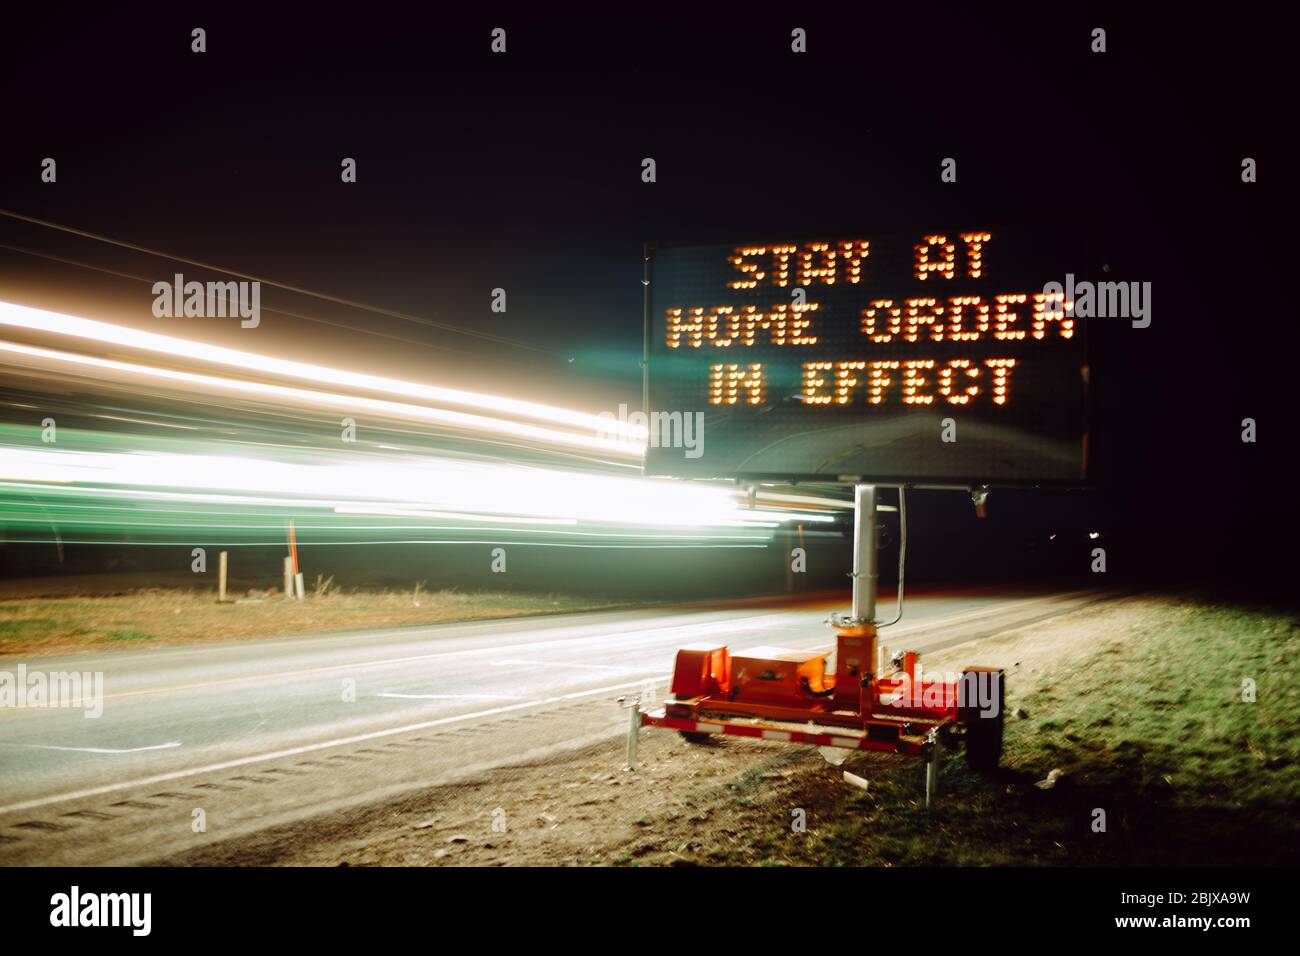 Stay at home order in effect displayed on roadside digital sign at night as cars pass by.  Covid-19 pandemic, stay at home order Stock Photo